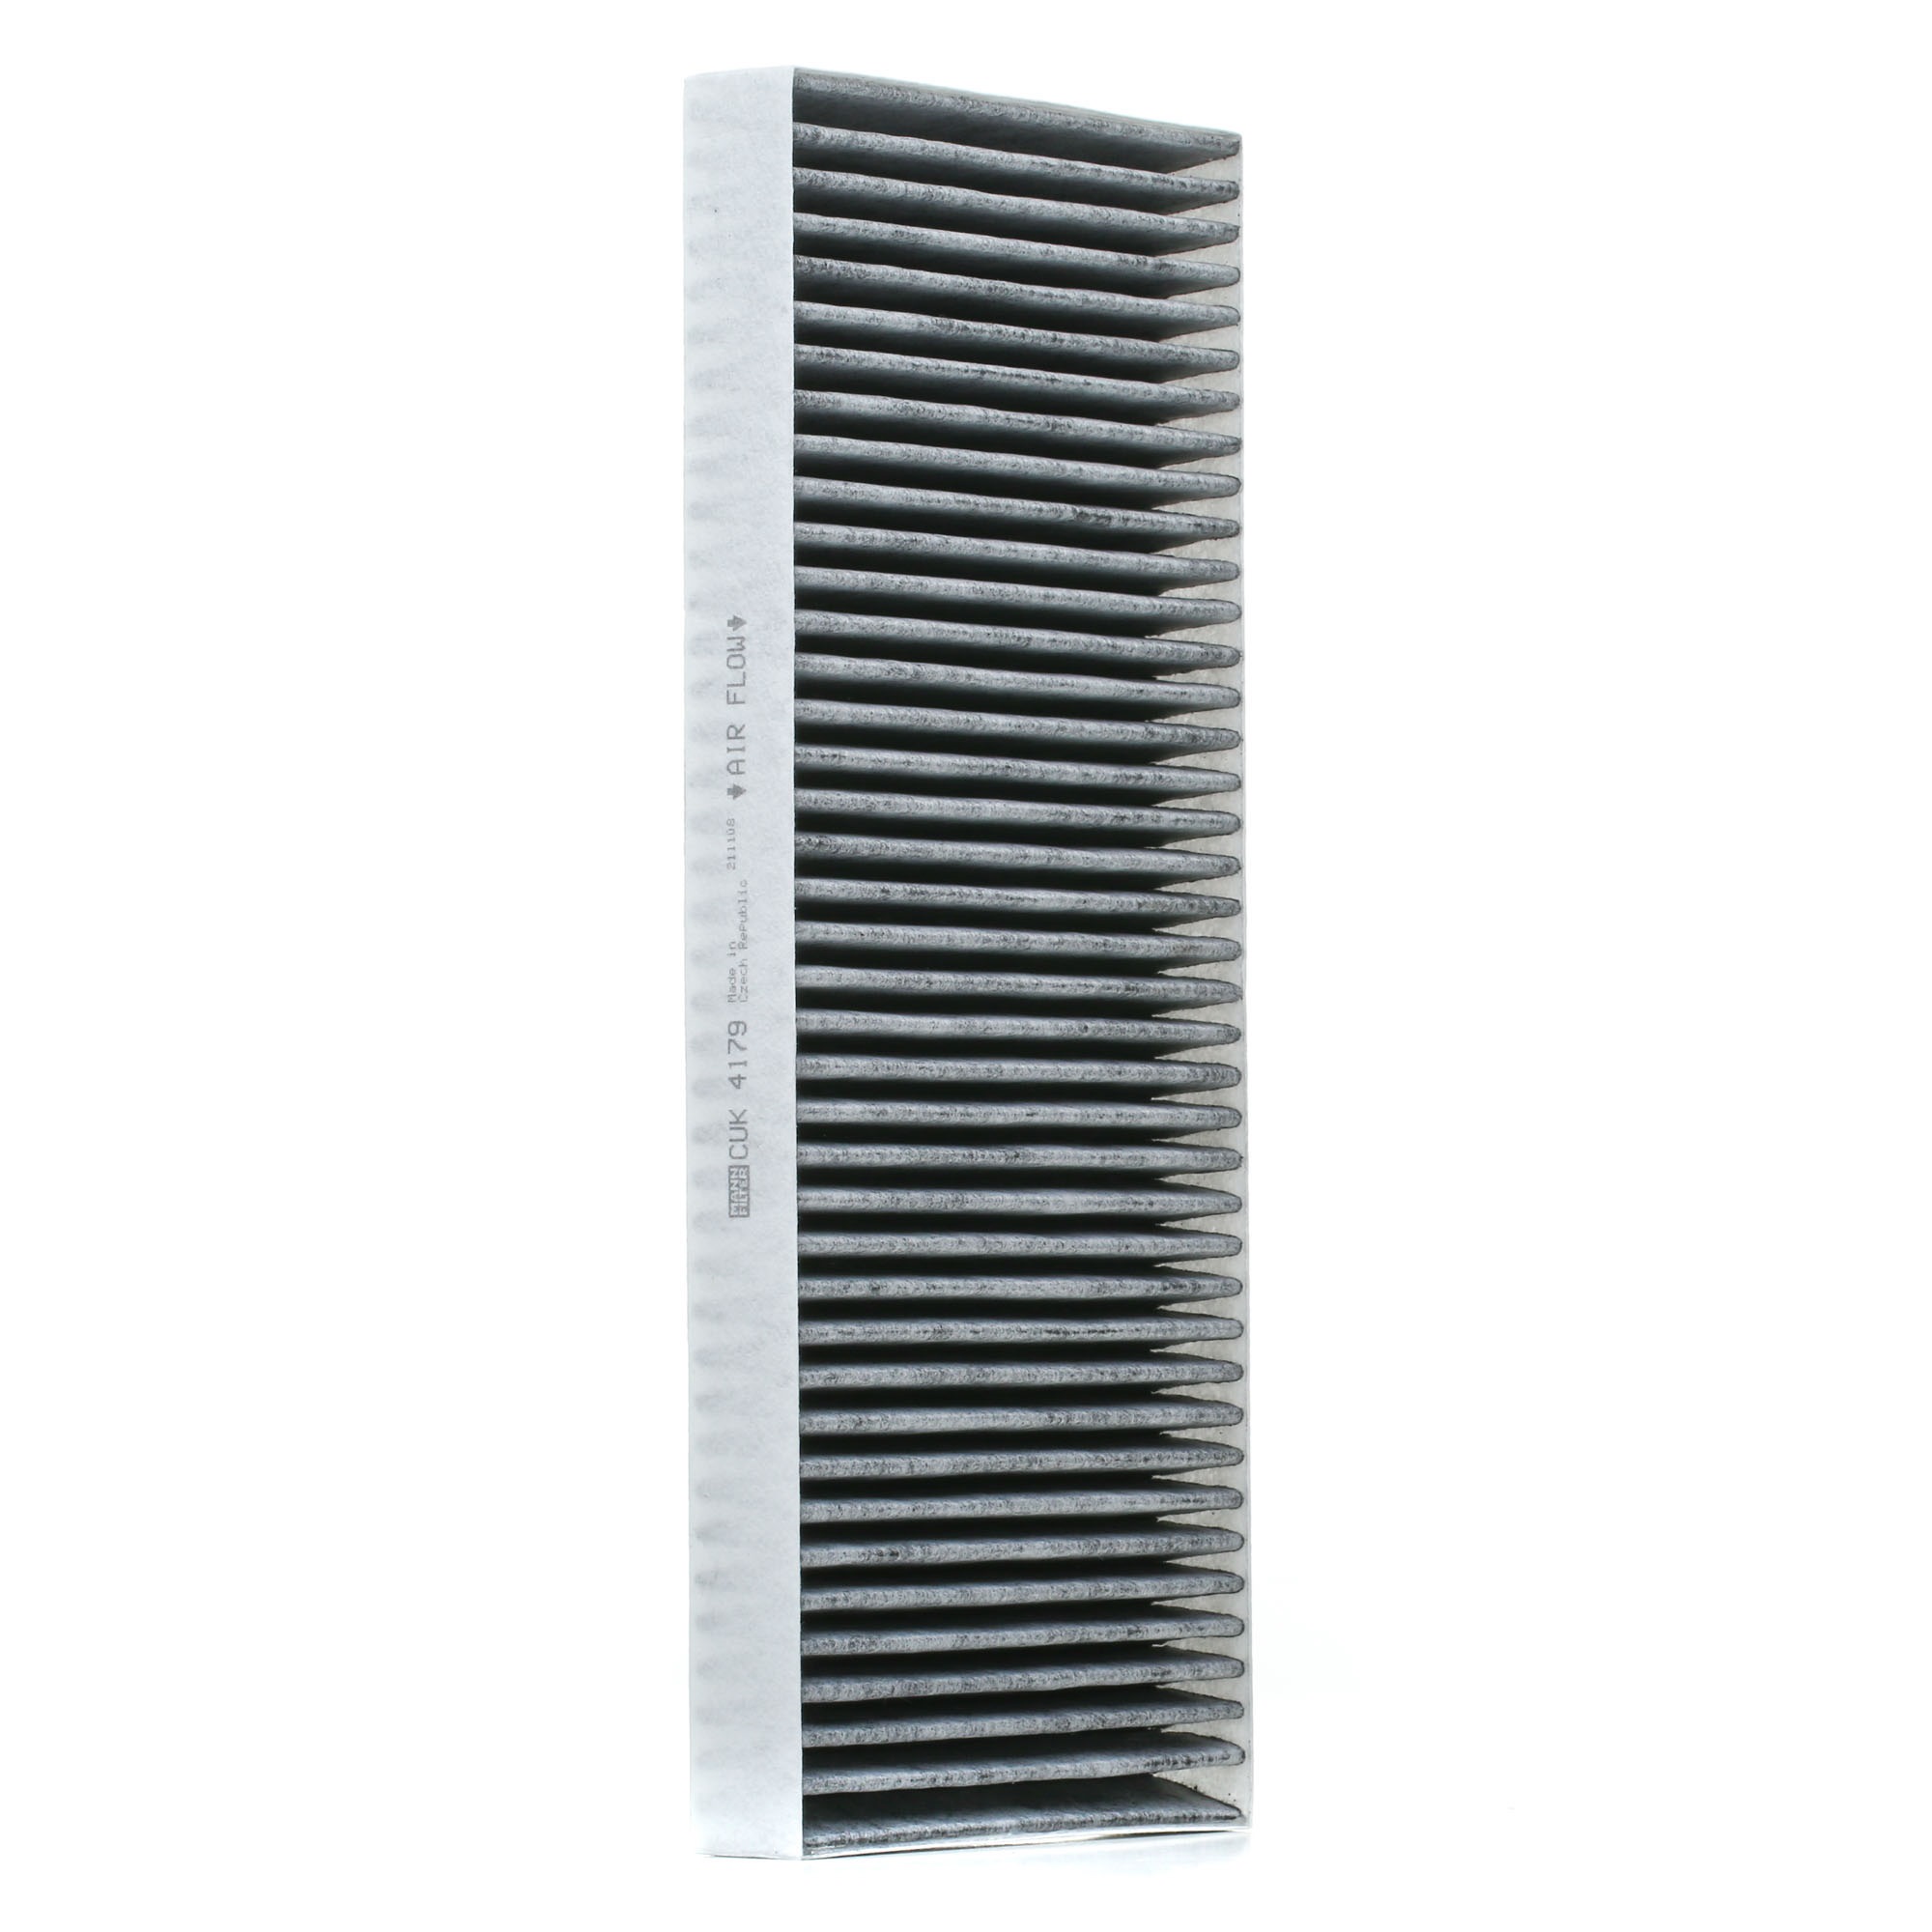 MANN-FILTER Activated Carbon Filter, 405 mm x 164 mm x 33 mm Width: 164mm, Height: 33mm, Length: 405mm Cabin filter CUK 4179 buy